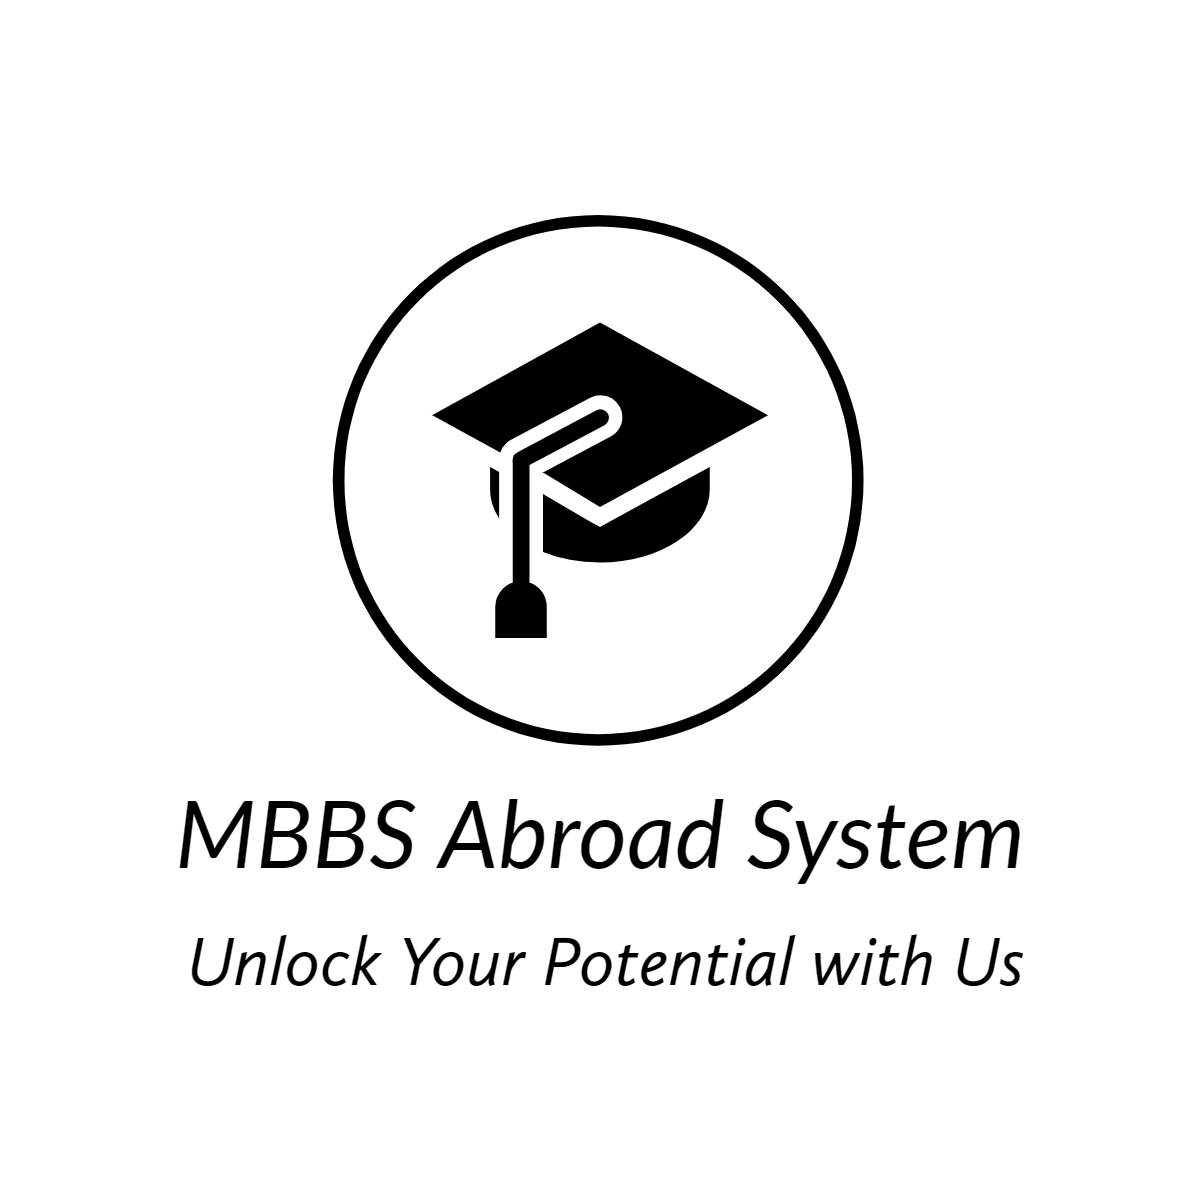 MBBS Abroad System